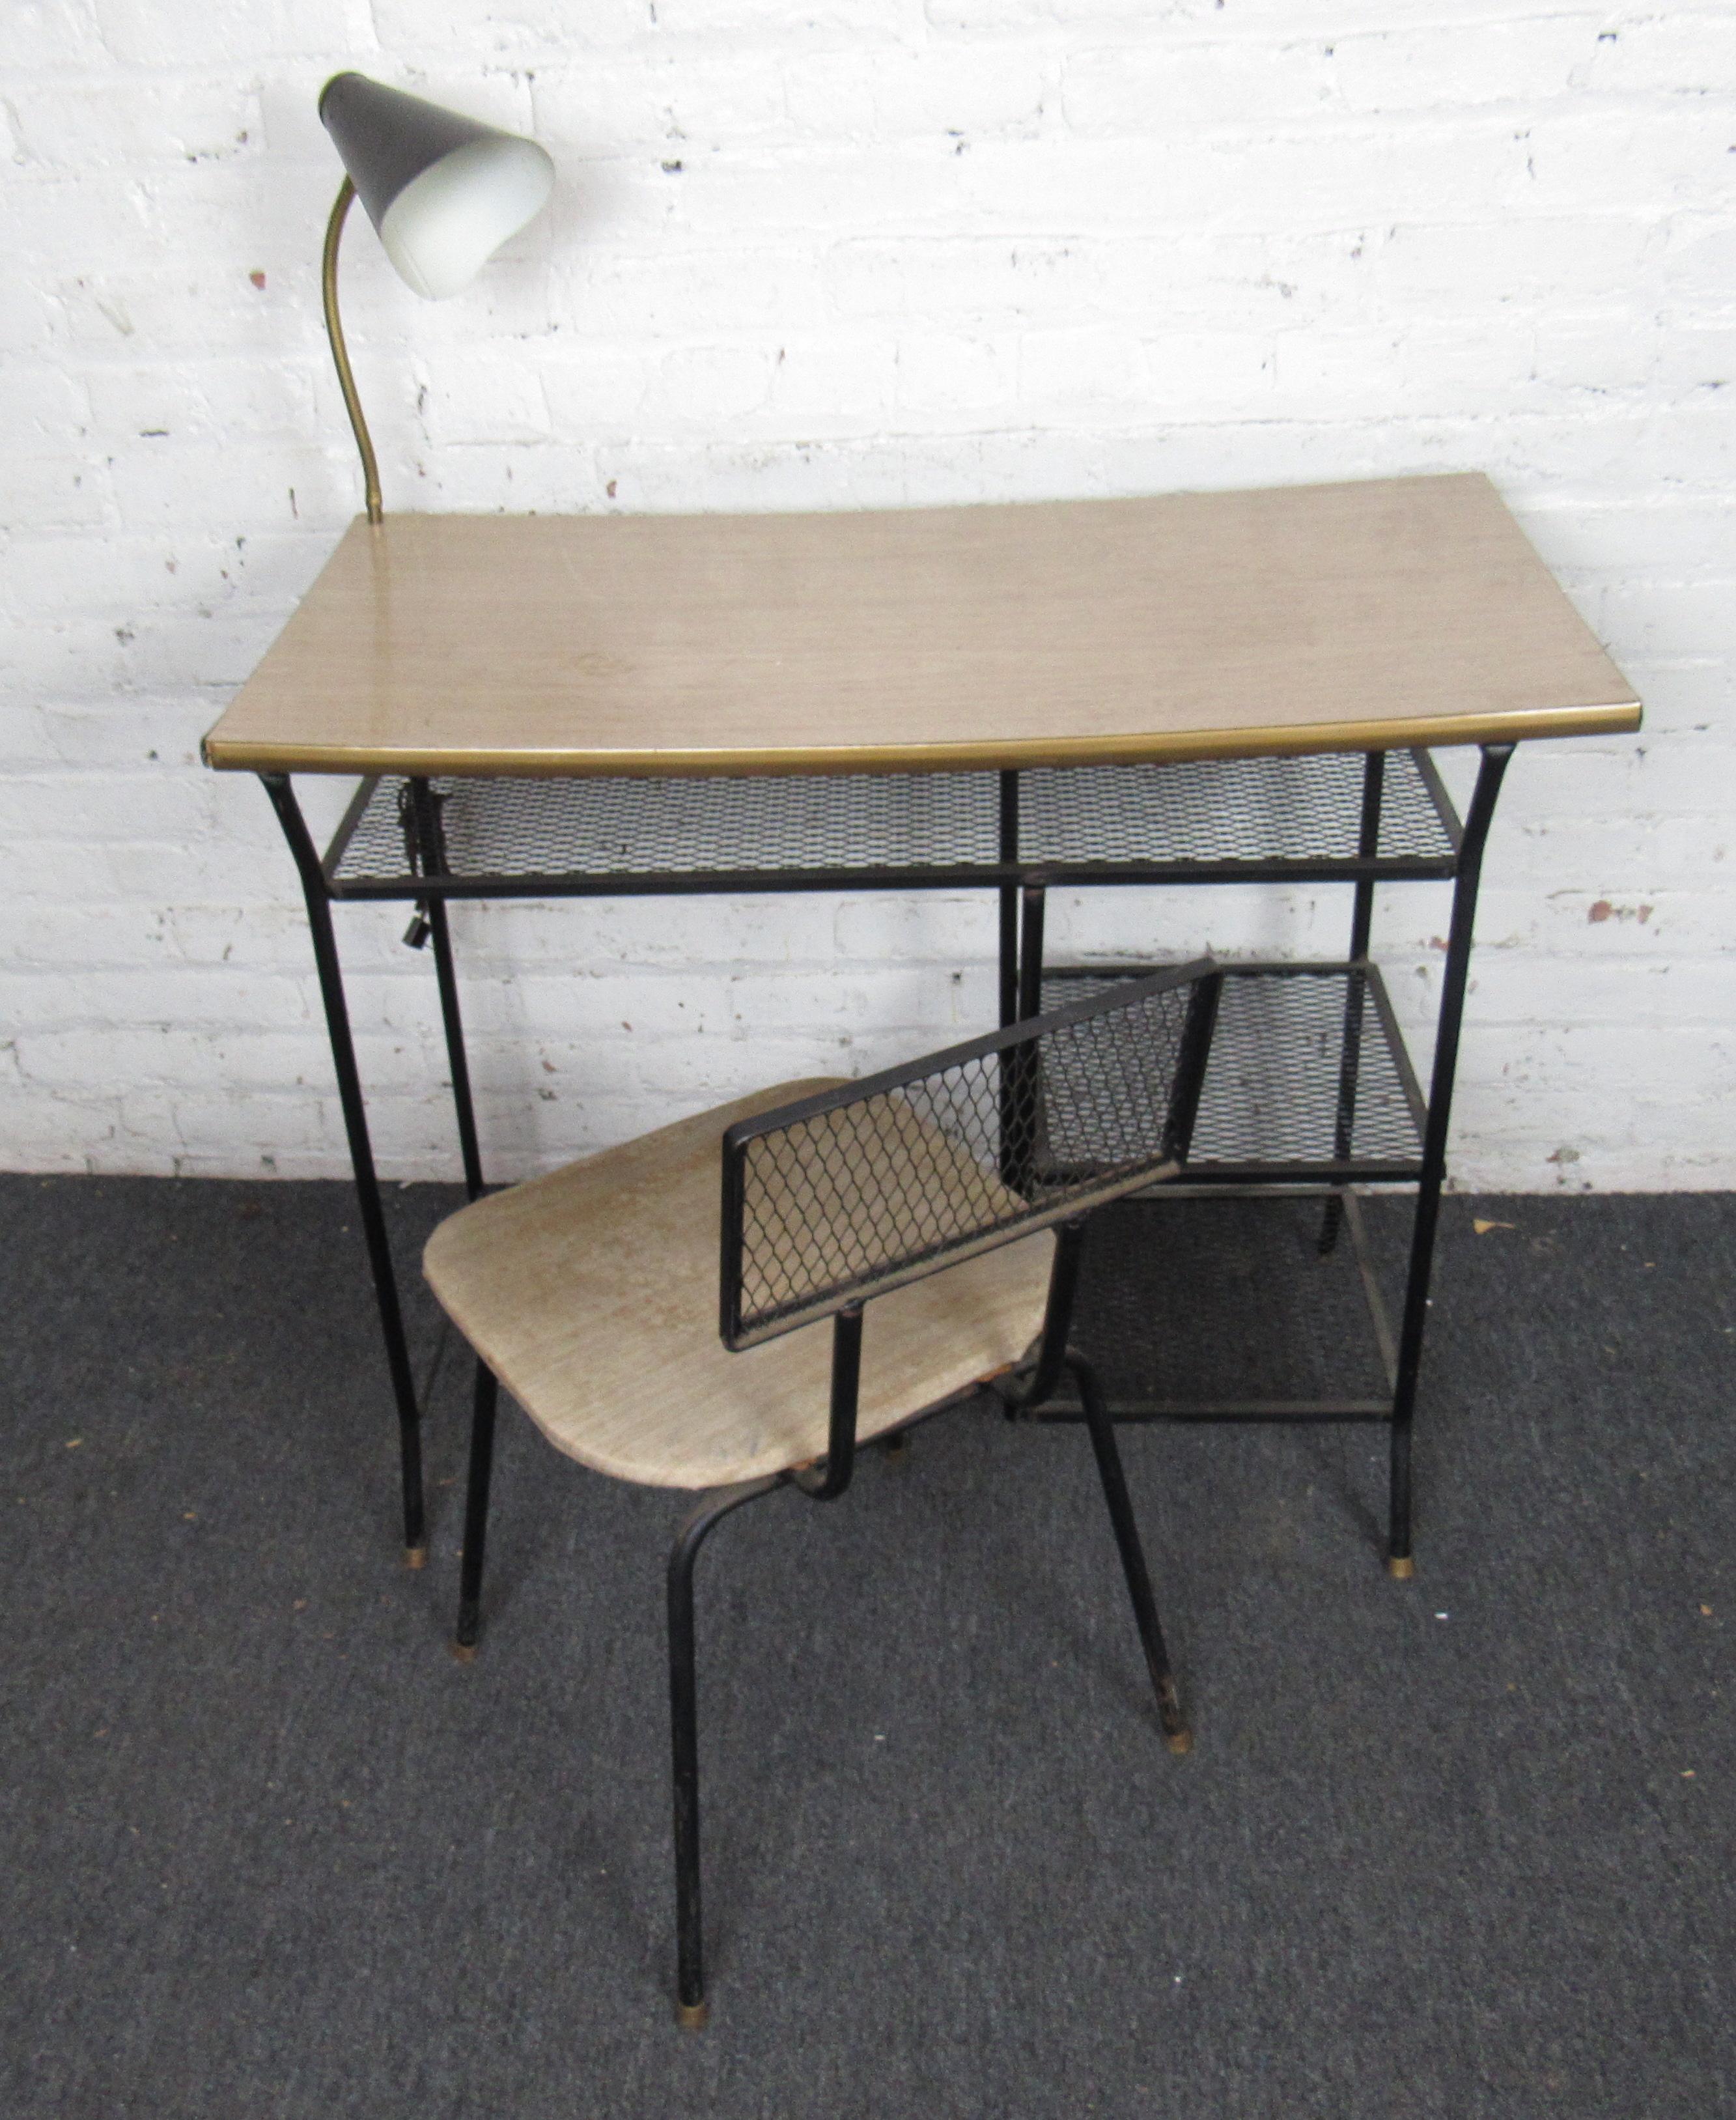 Iron frame desk and chair with linoleum style top and adjustable lamp.
Measures: Kneehole: 19 W, 24 H

(Please confirm item location - NY or NJ - with dealer).
 